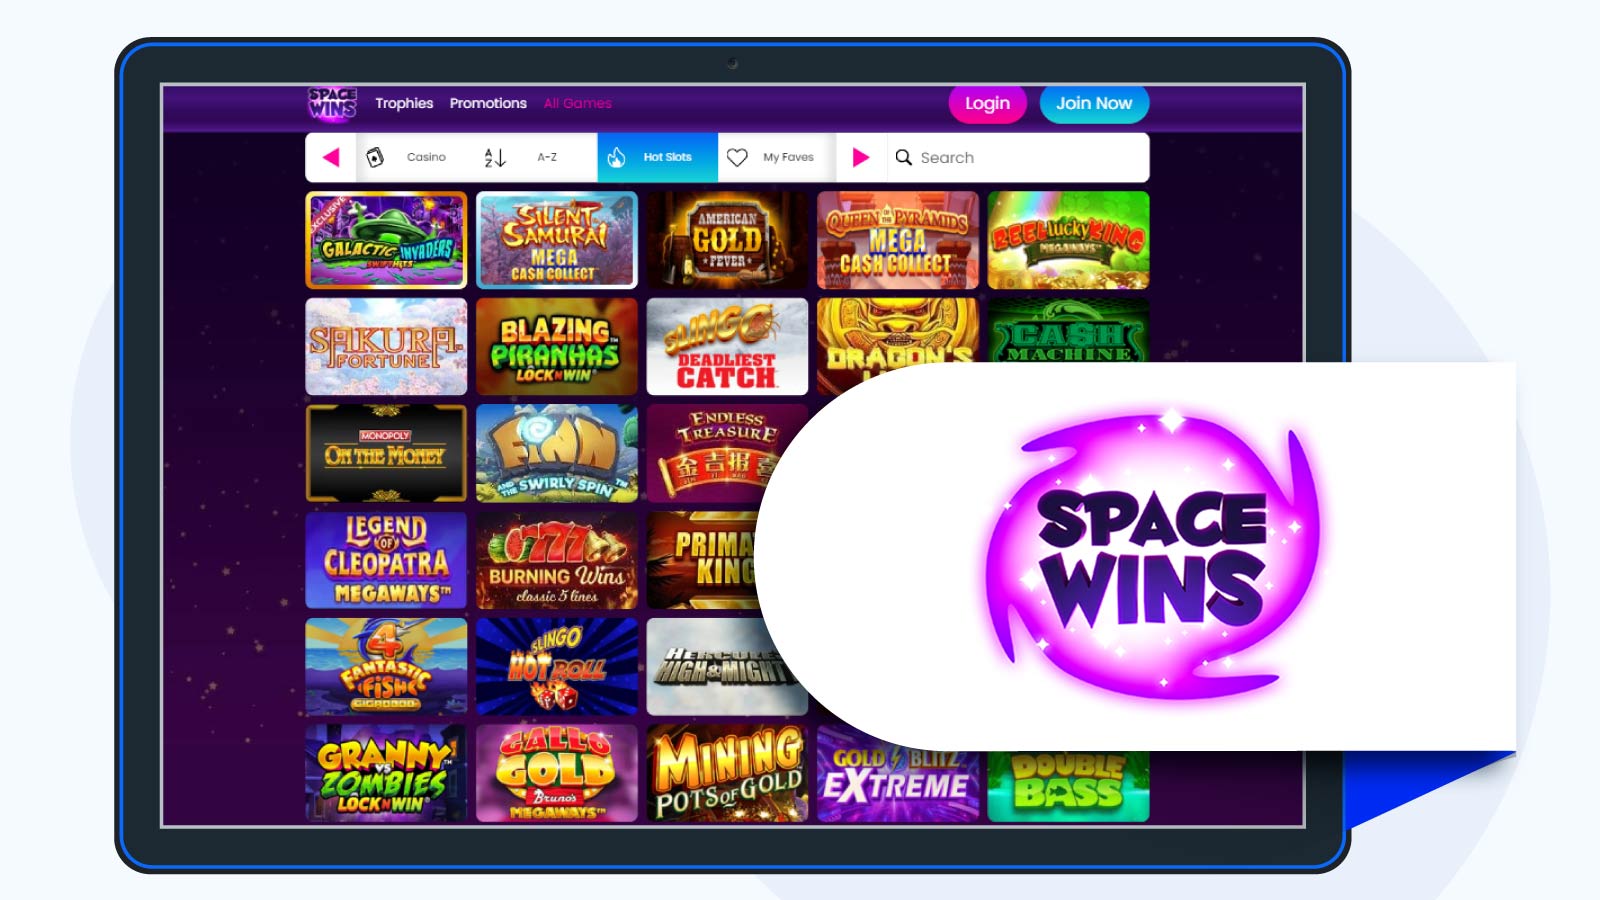 Space-Wins-Casino-Netent-free-spins